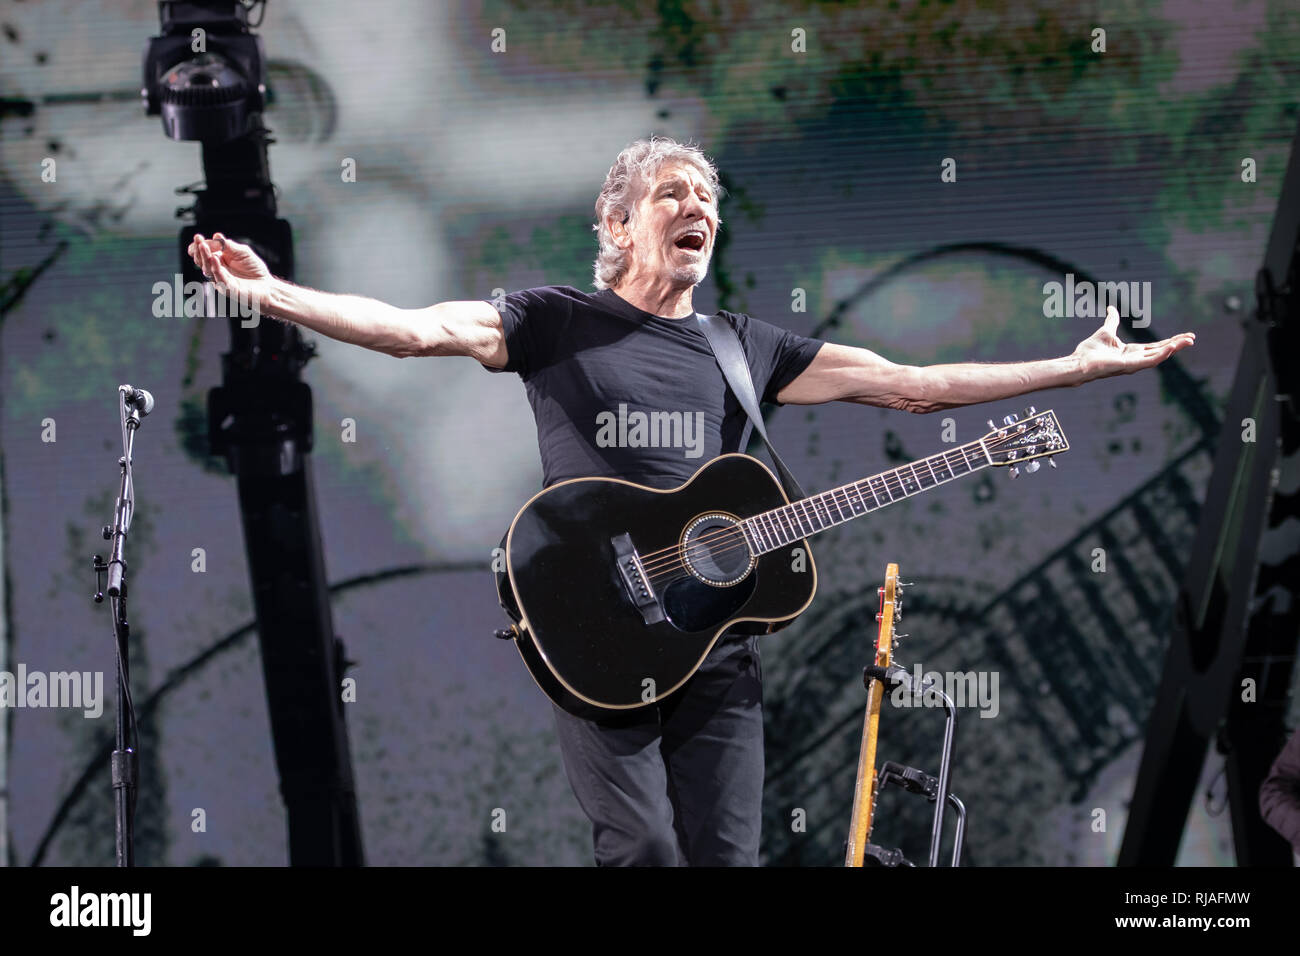 Lucca, Italy. 11th july, 2018. Italy, Lucca: singer Roger Waters (Pink Floyd) performs live on stage at Lucca Summer Festival 2018  for “Us + Them” tour 2018 Stock Photo